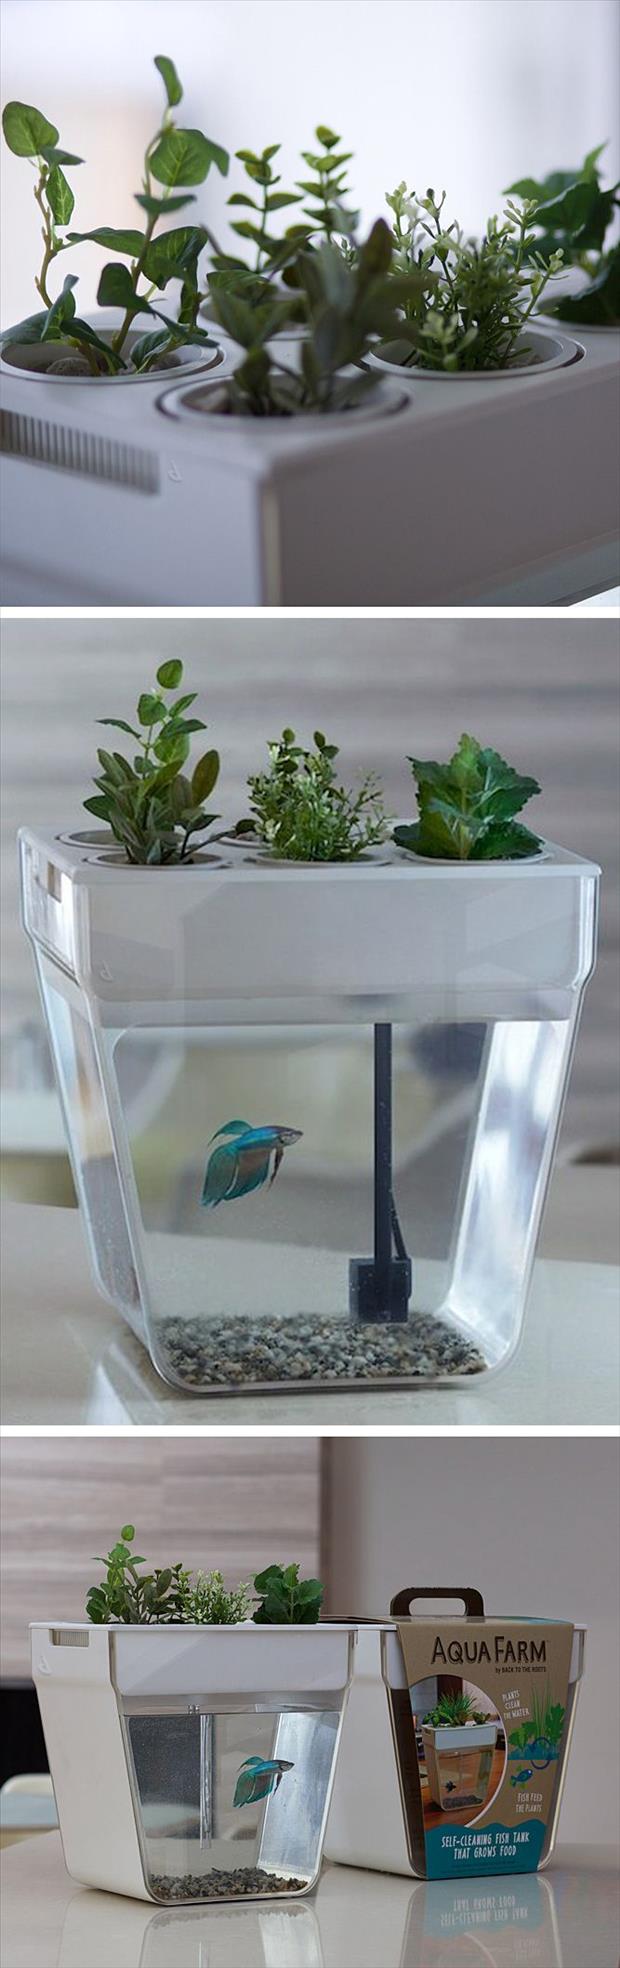 Top 40 DIY Projects Gadgets And Ideas For Your Home-homesthetics.net (49)